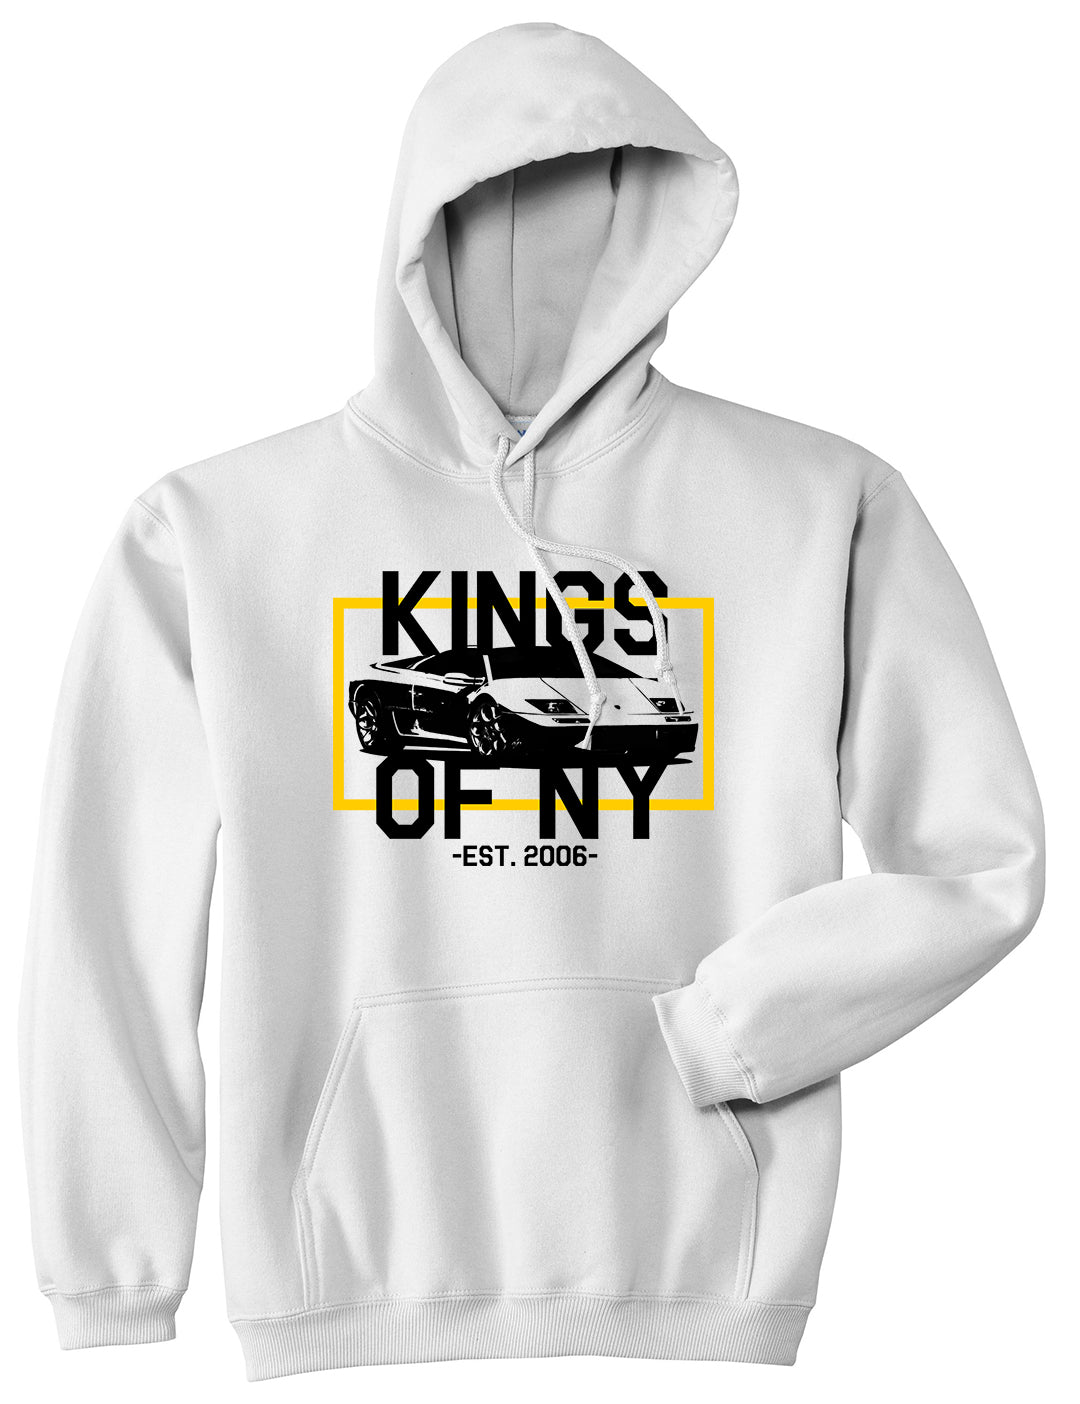 Lambo Fastlane Est 2006 Mens Pullover Hoodie White by Kings Of NY